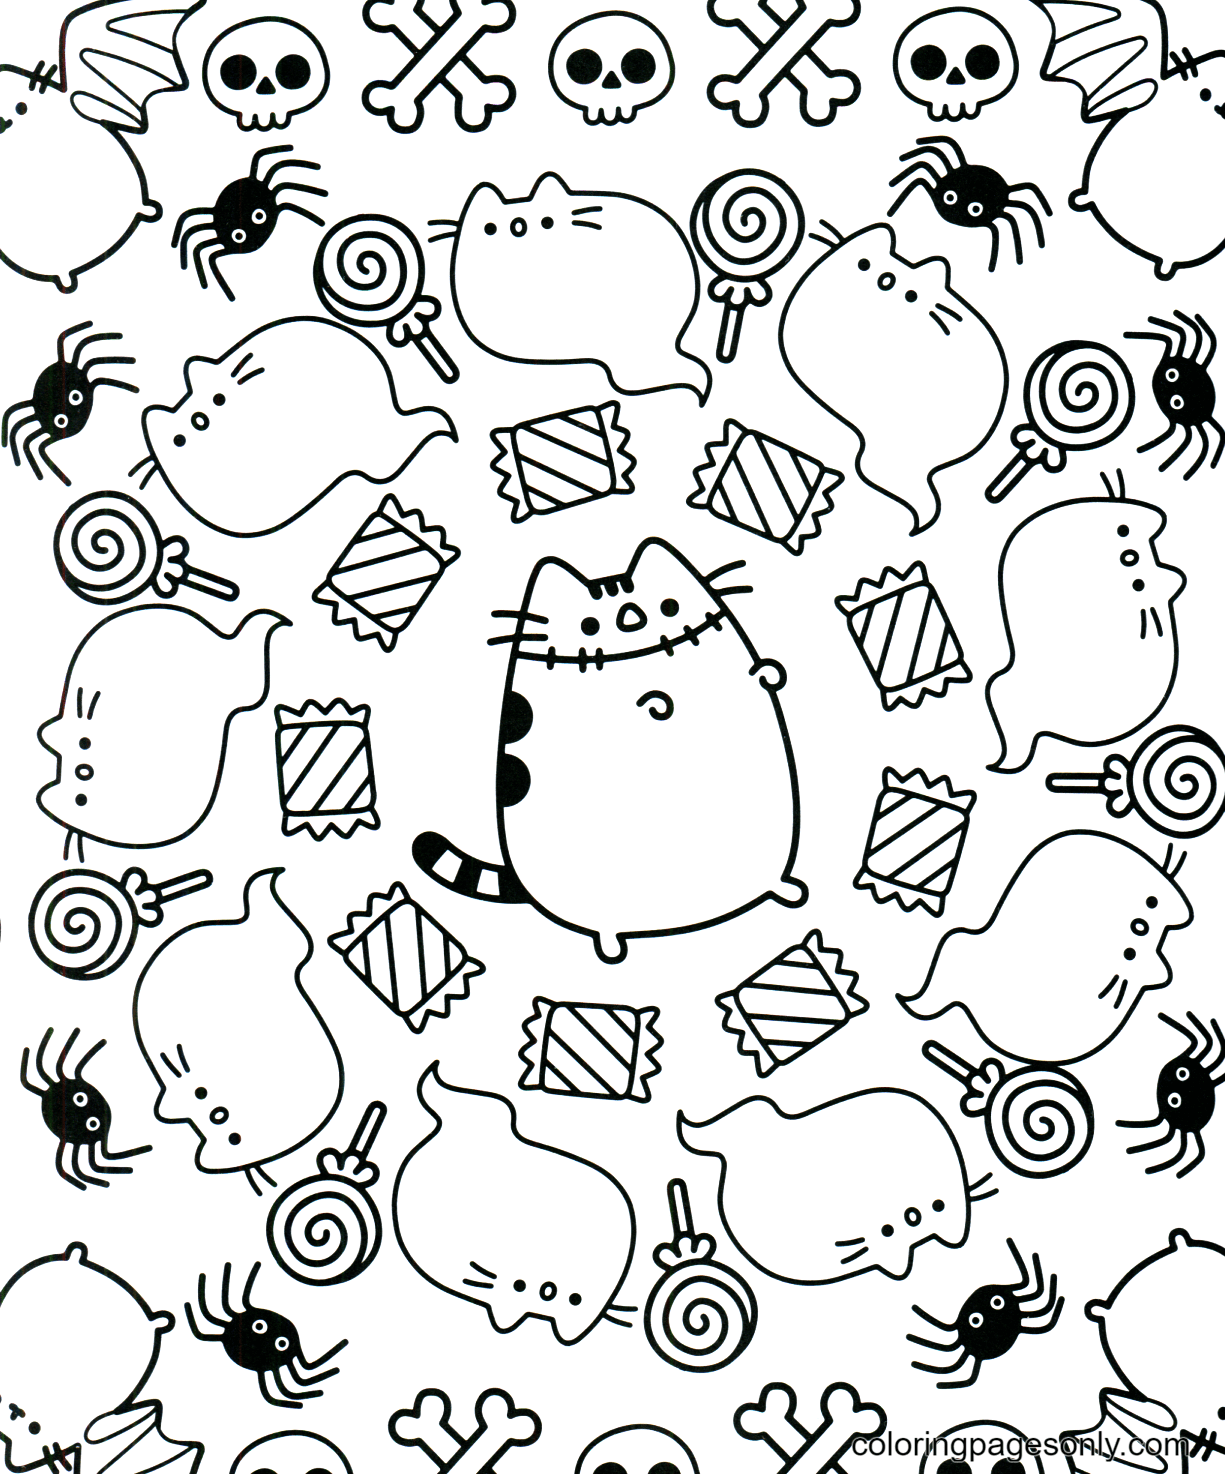 Pusheen Coloring For Adults Donut Halloween Coloring Pages - Pusheen